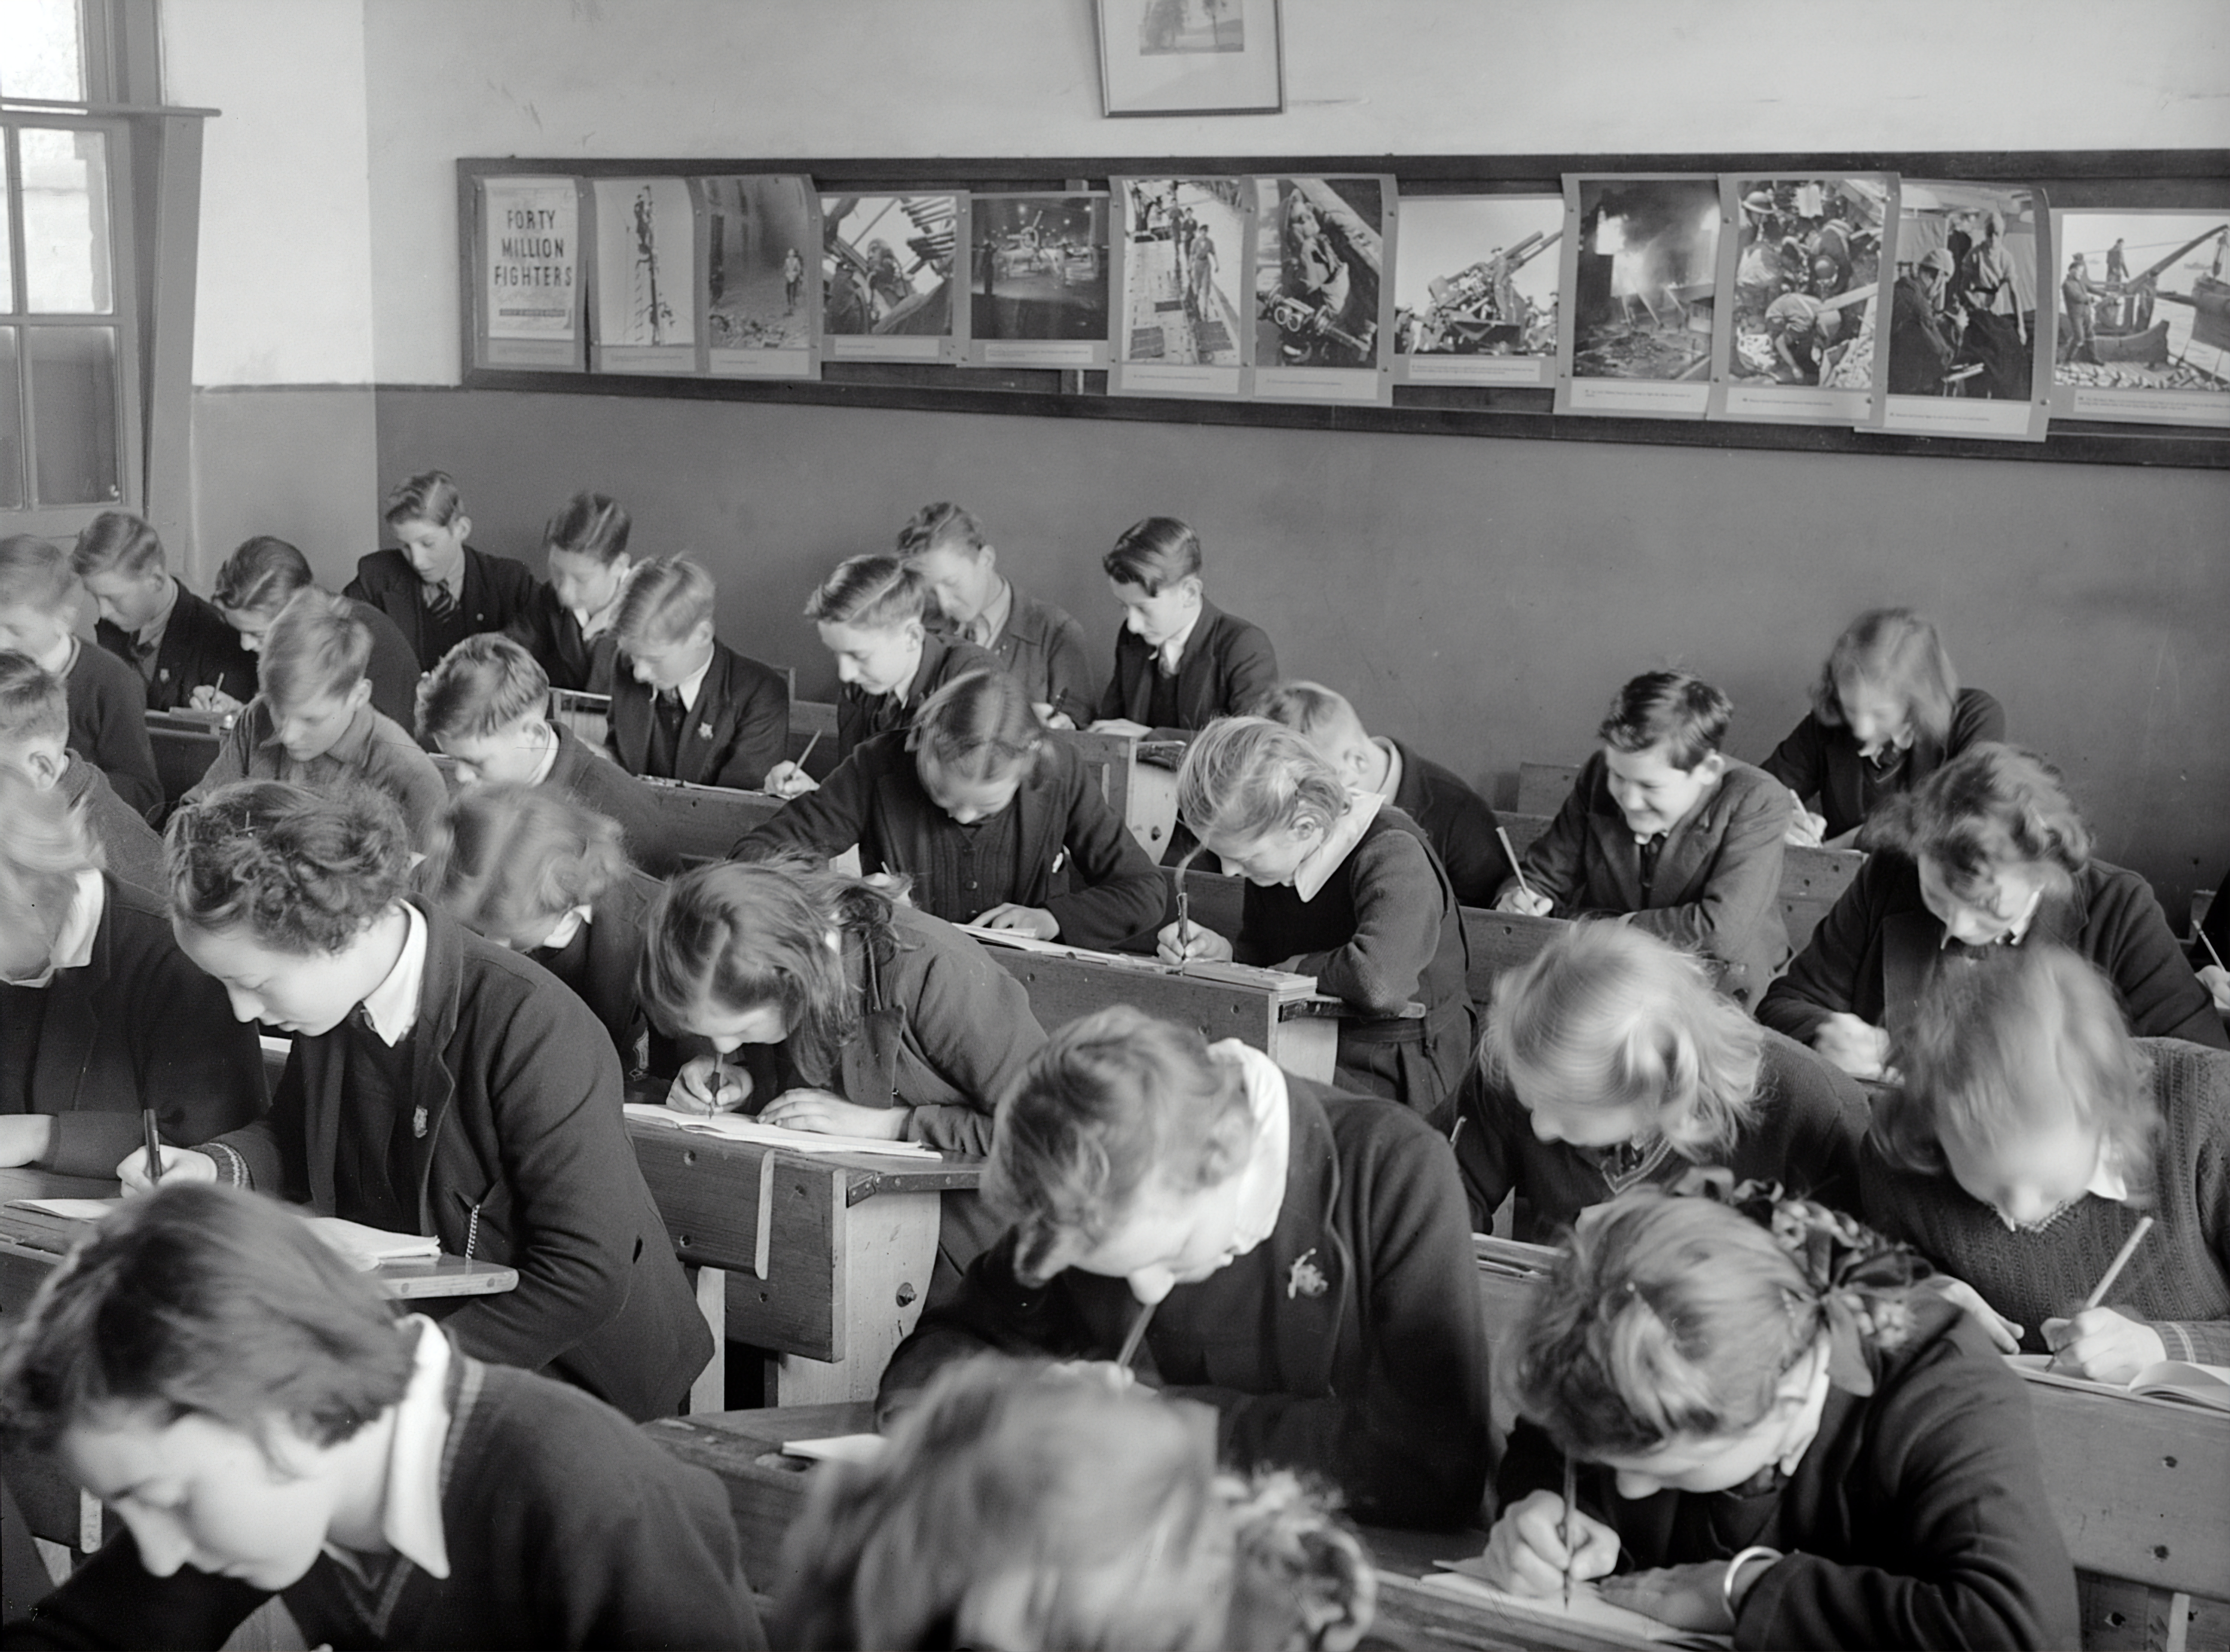 students sit with heads bowed in a classroom in what looks like the late 1940's